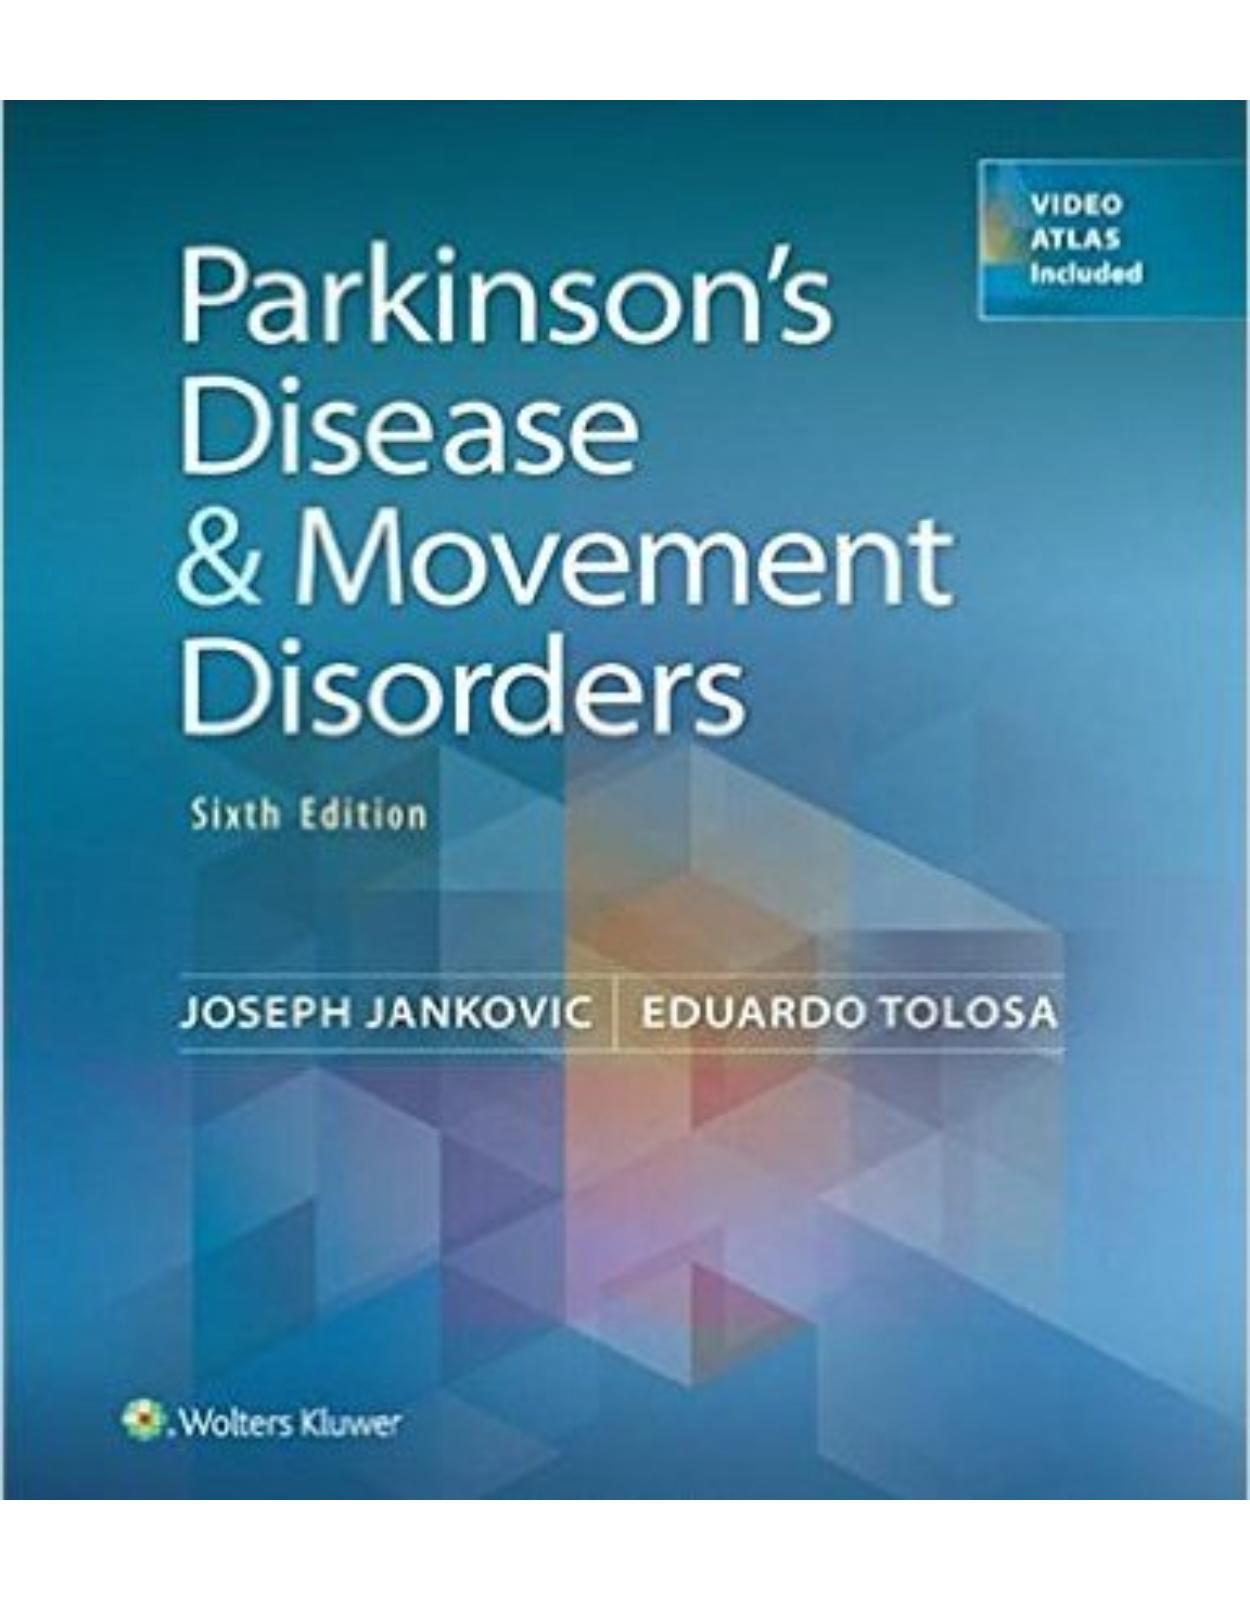 Parkinson's Disease and Movement Disorders Sixth Edition